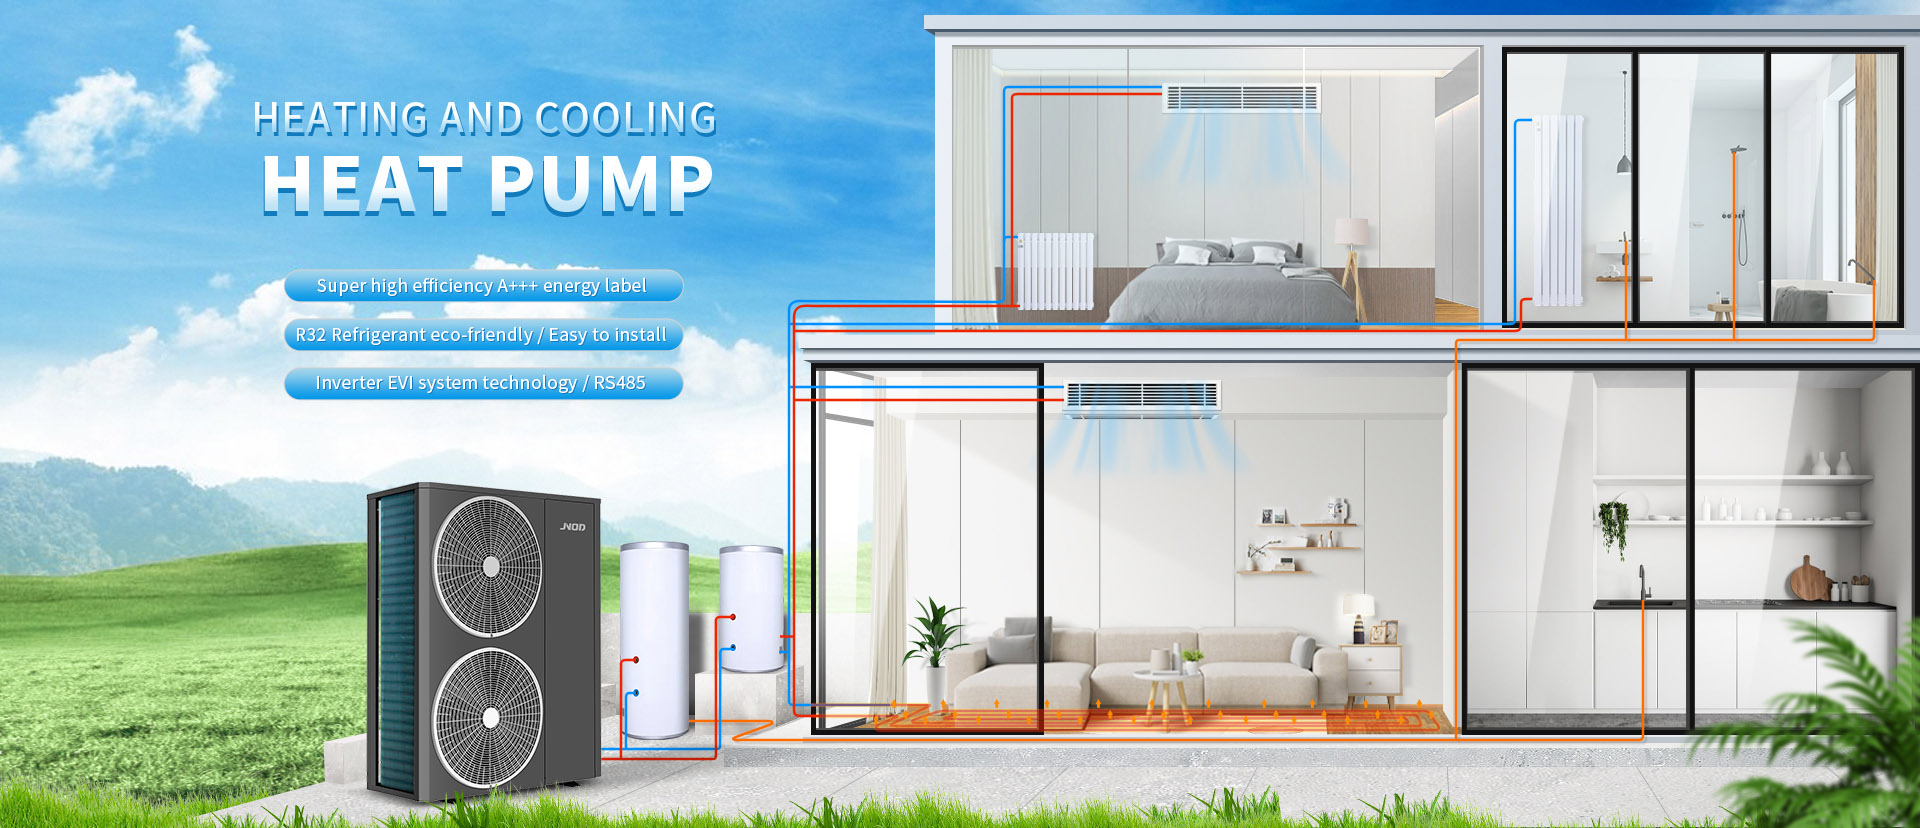 Monoblock Heating And Cooling Heat Pump